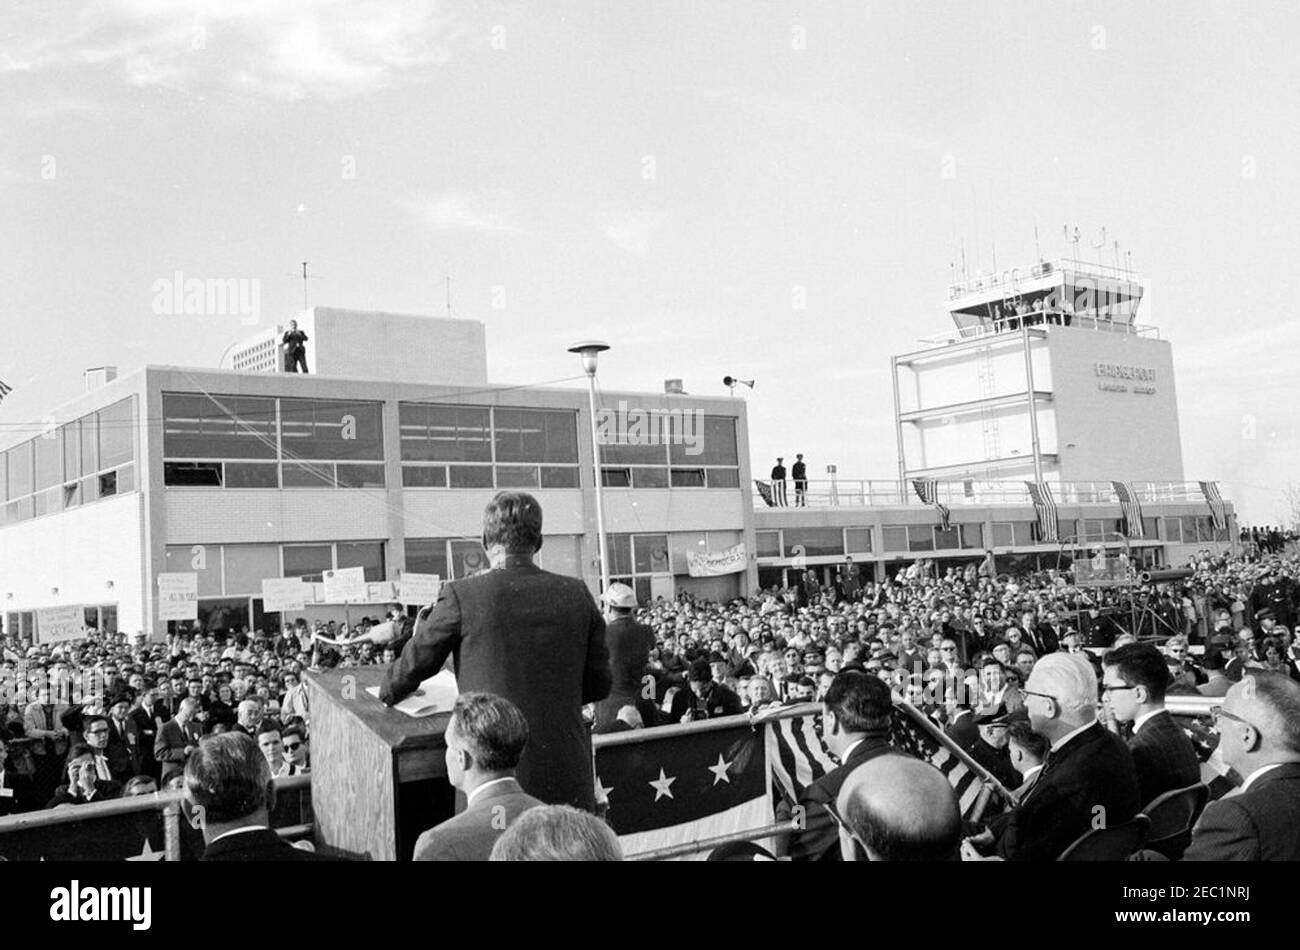 Congressional campaign trip: Bridgeport, Connecticut, airport rally. President John F. Kennedy delivers remarks at Bridgeport Municipal Airport in Stratford, Connecticut, during a congressional campaign trip. Stock Photo